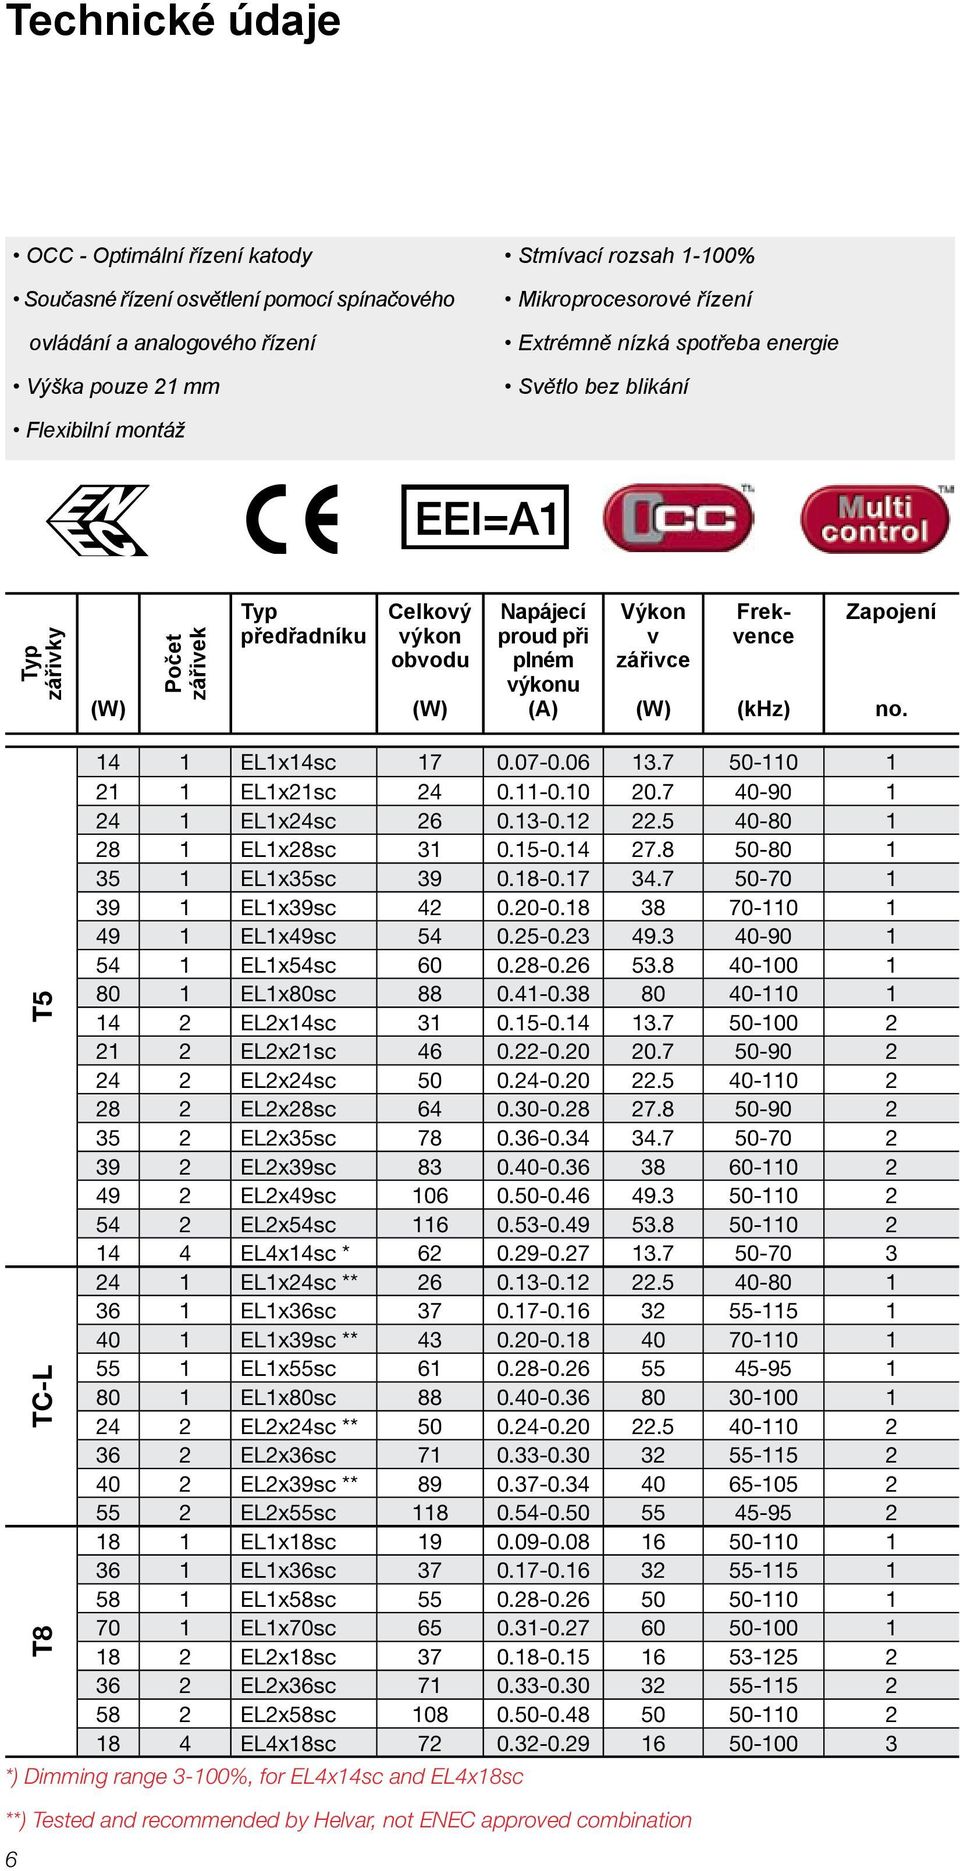 (khz) Zapojení no. *) Dimming range 3-100%, for EL4x14sc and EL4x18sc **) Tested and recommended by Helvar, not ENEC approved combination T5 TC-L T8 14 1 EL1x14sc 17 0.07-0.06 13.